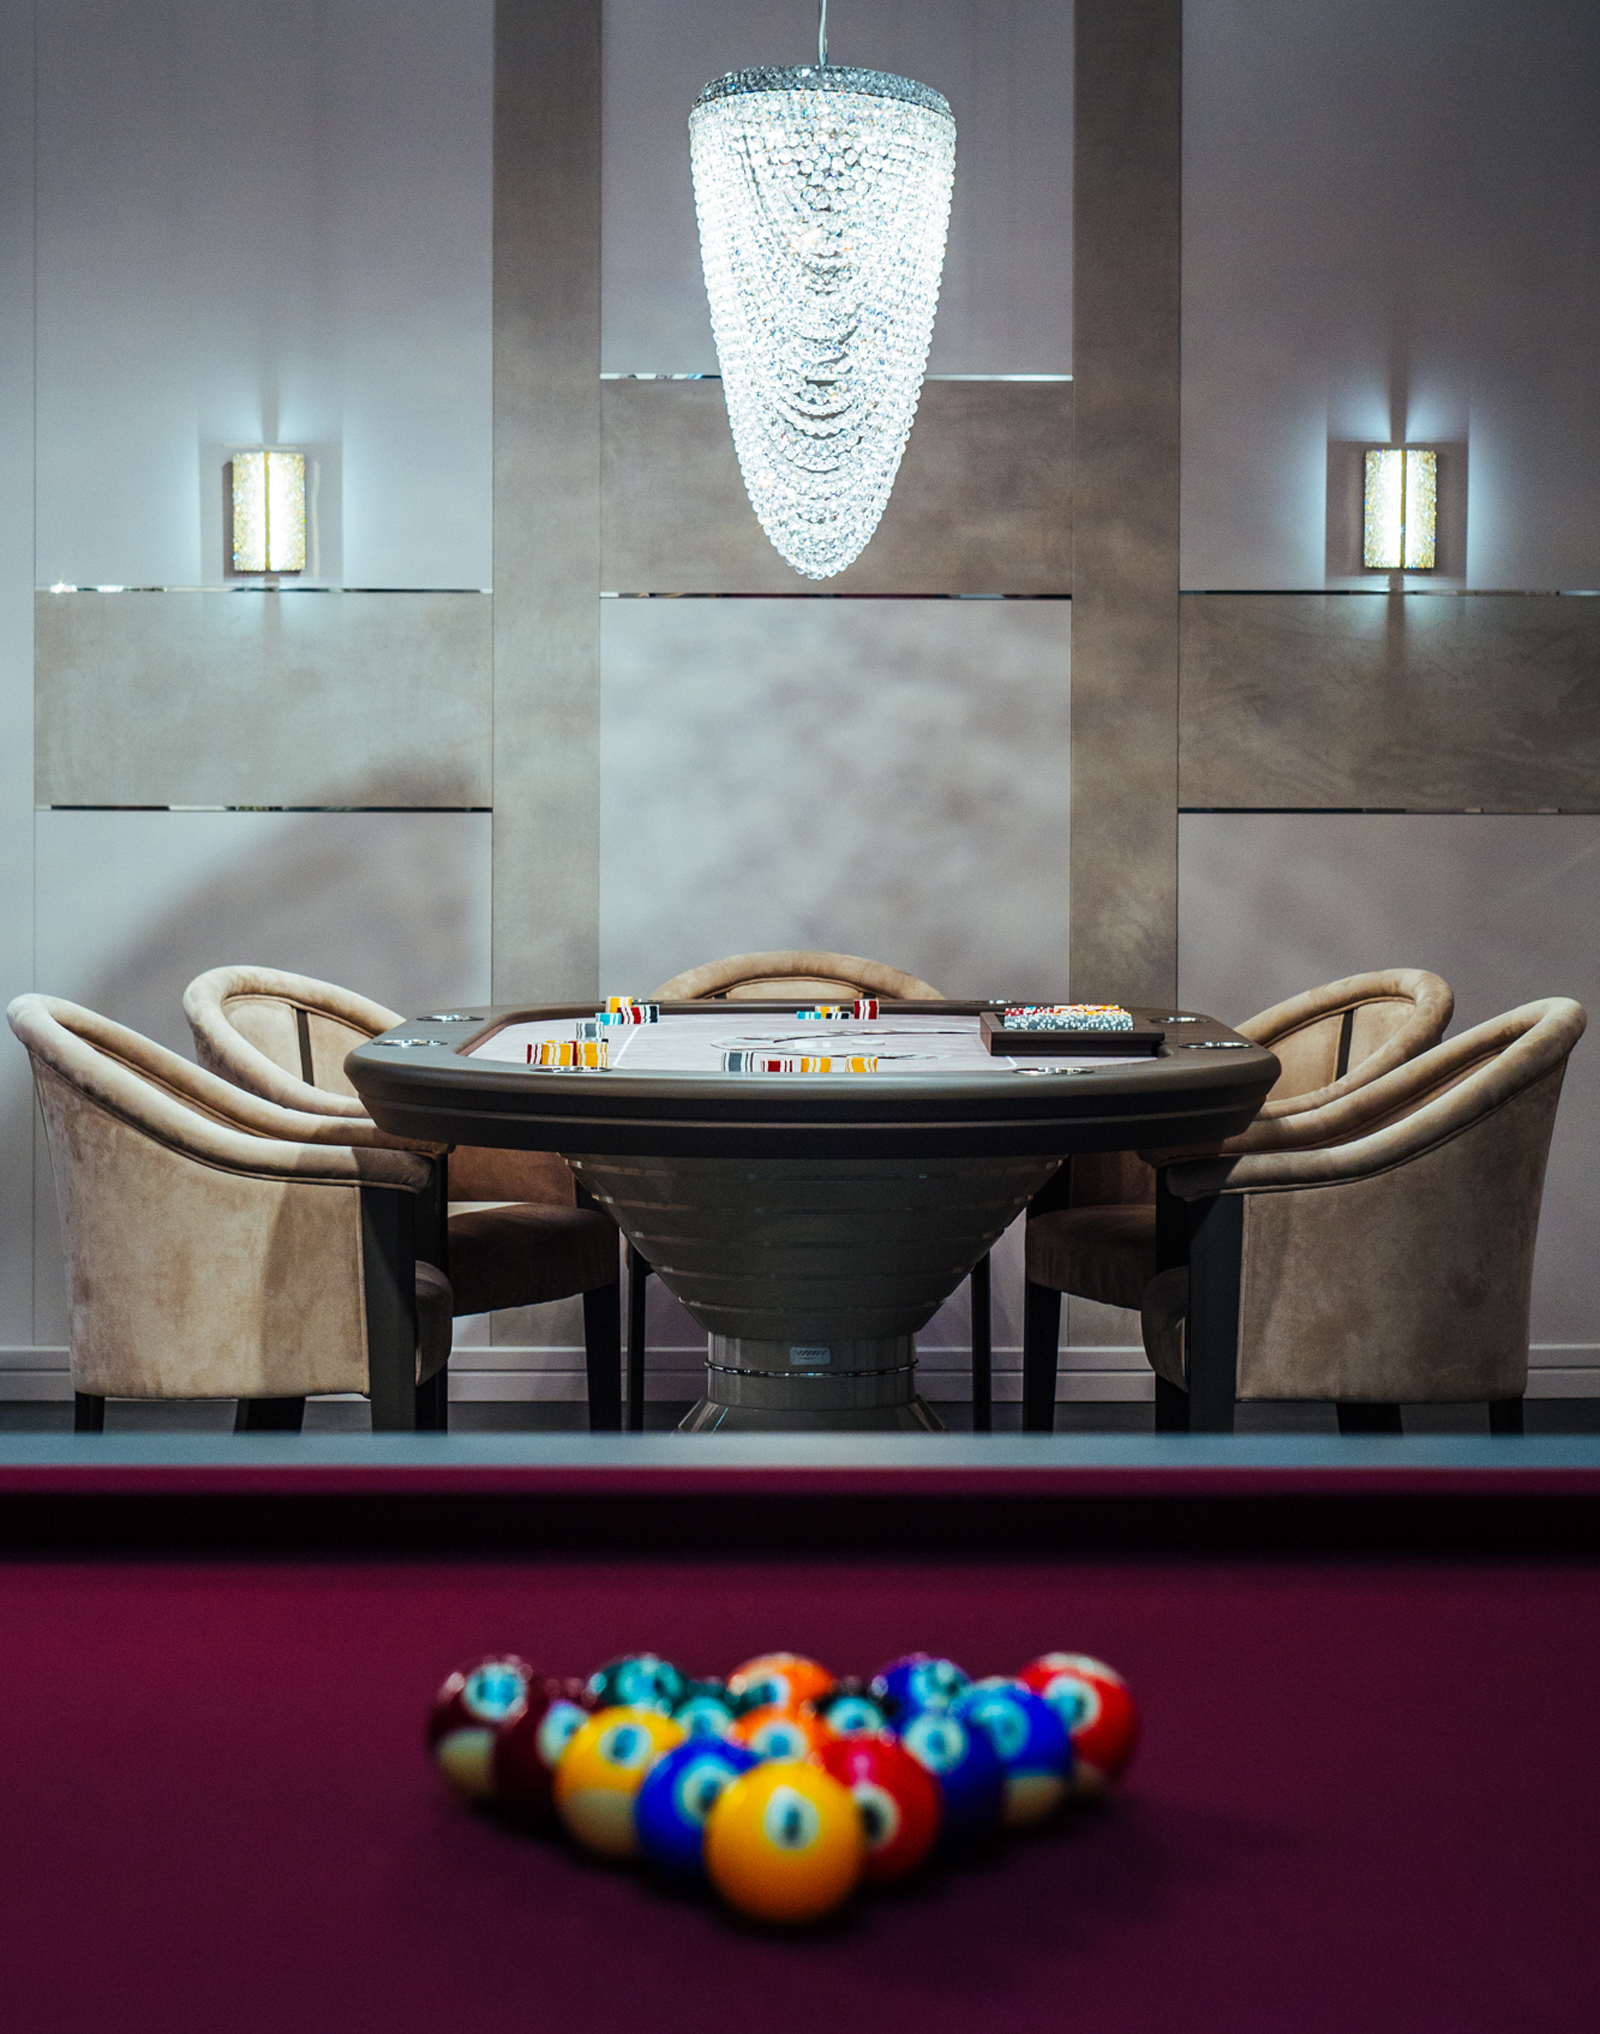 Luxury poker table for sales produced in Italy by Vismara, for private game room and private club